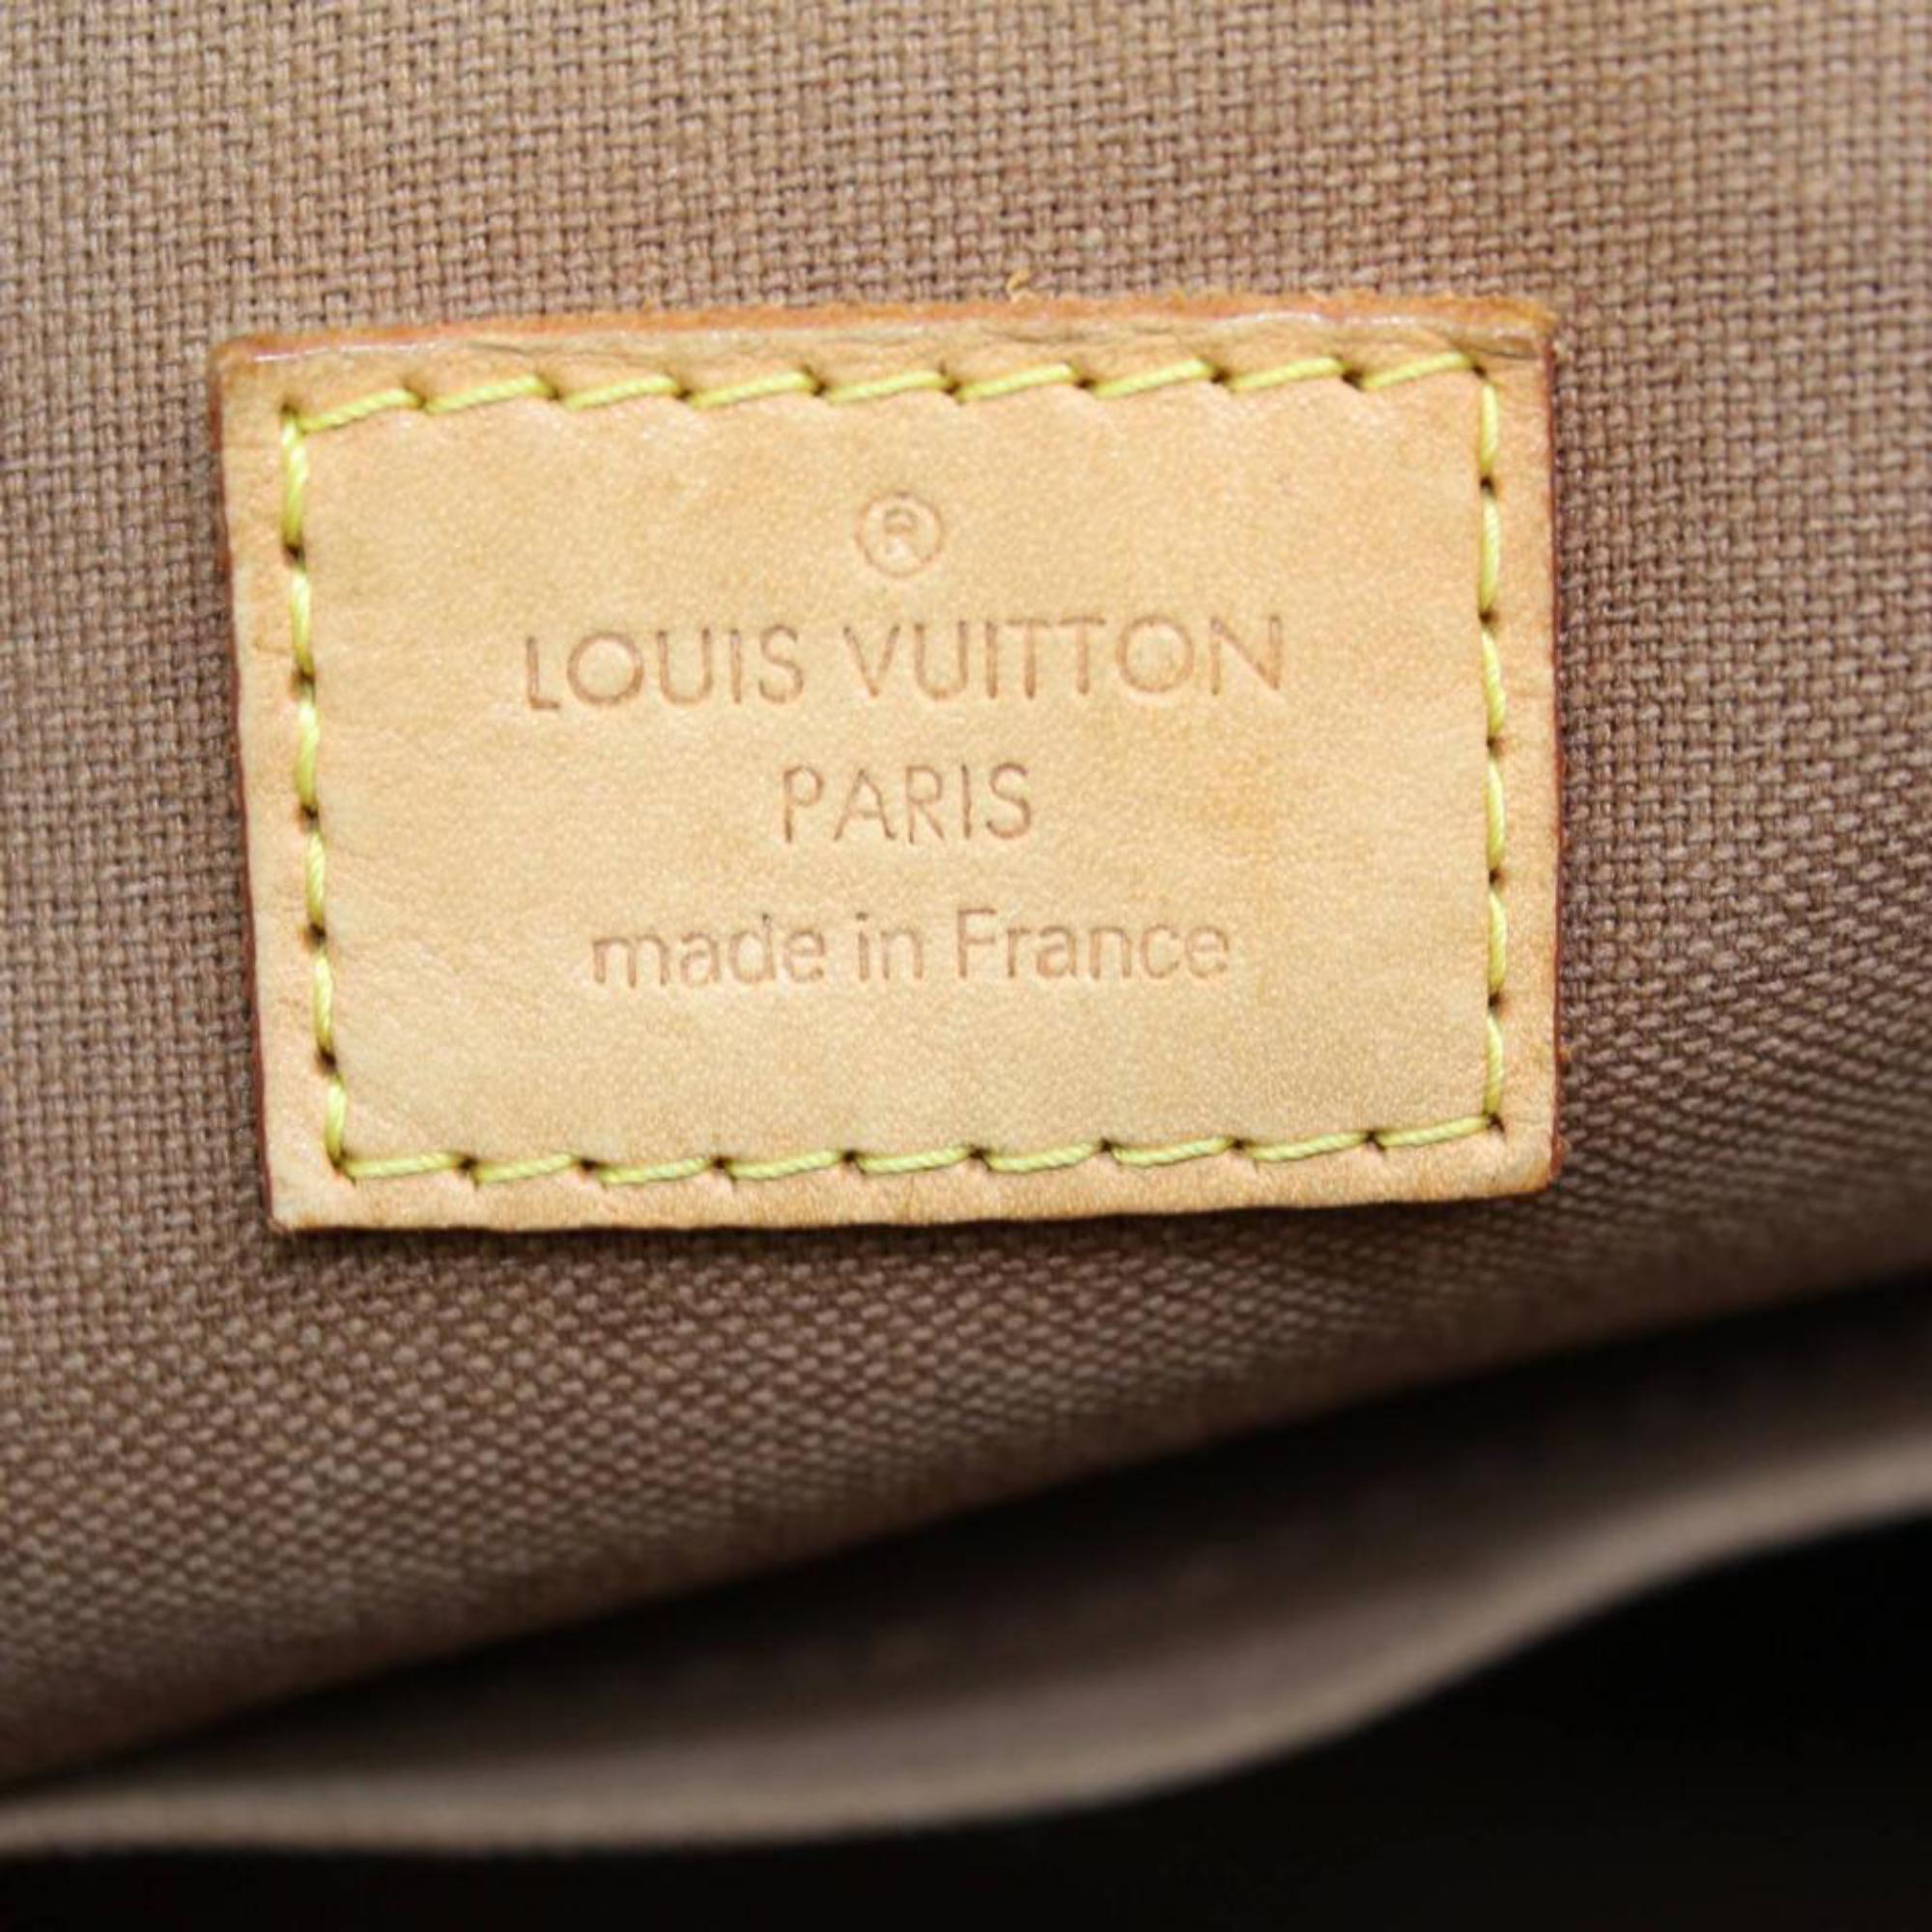 Louis Vuitton Lockit Monogram Vertical 866680 Brown Coated Canvas Satchel In Good Condition For Sale In Forest Hills, NY